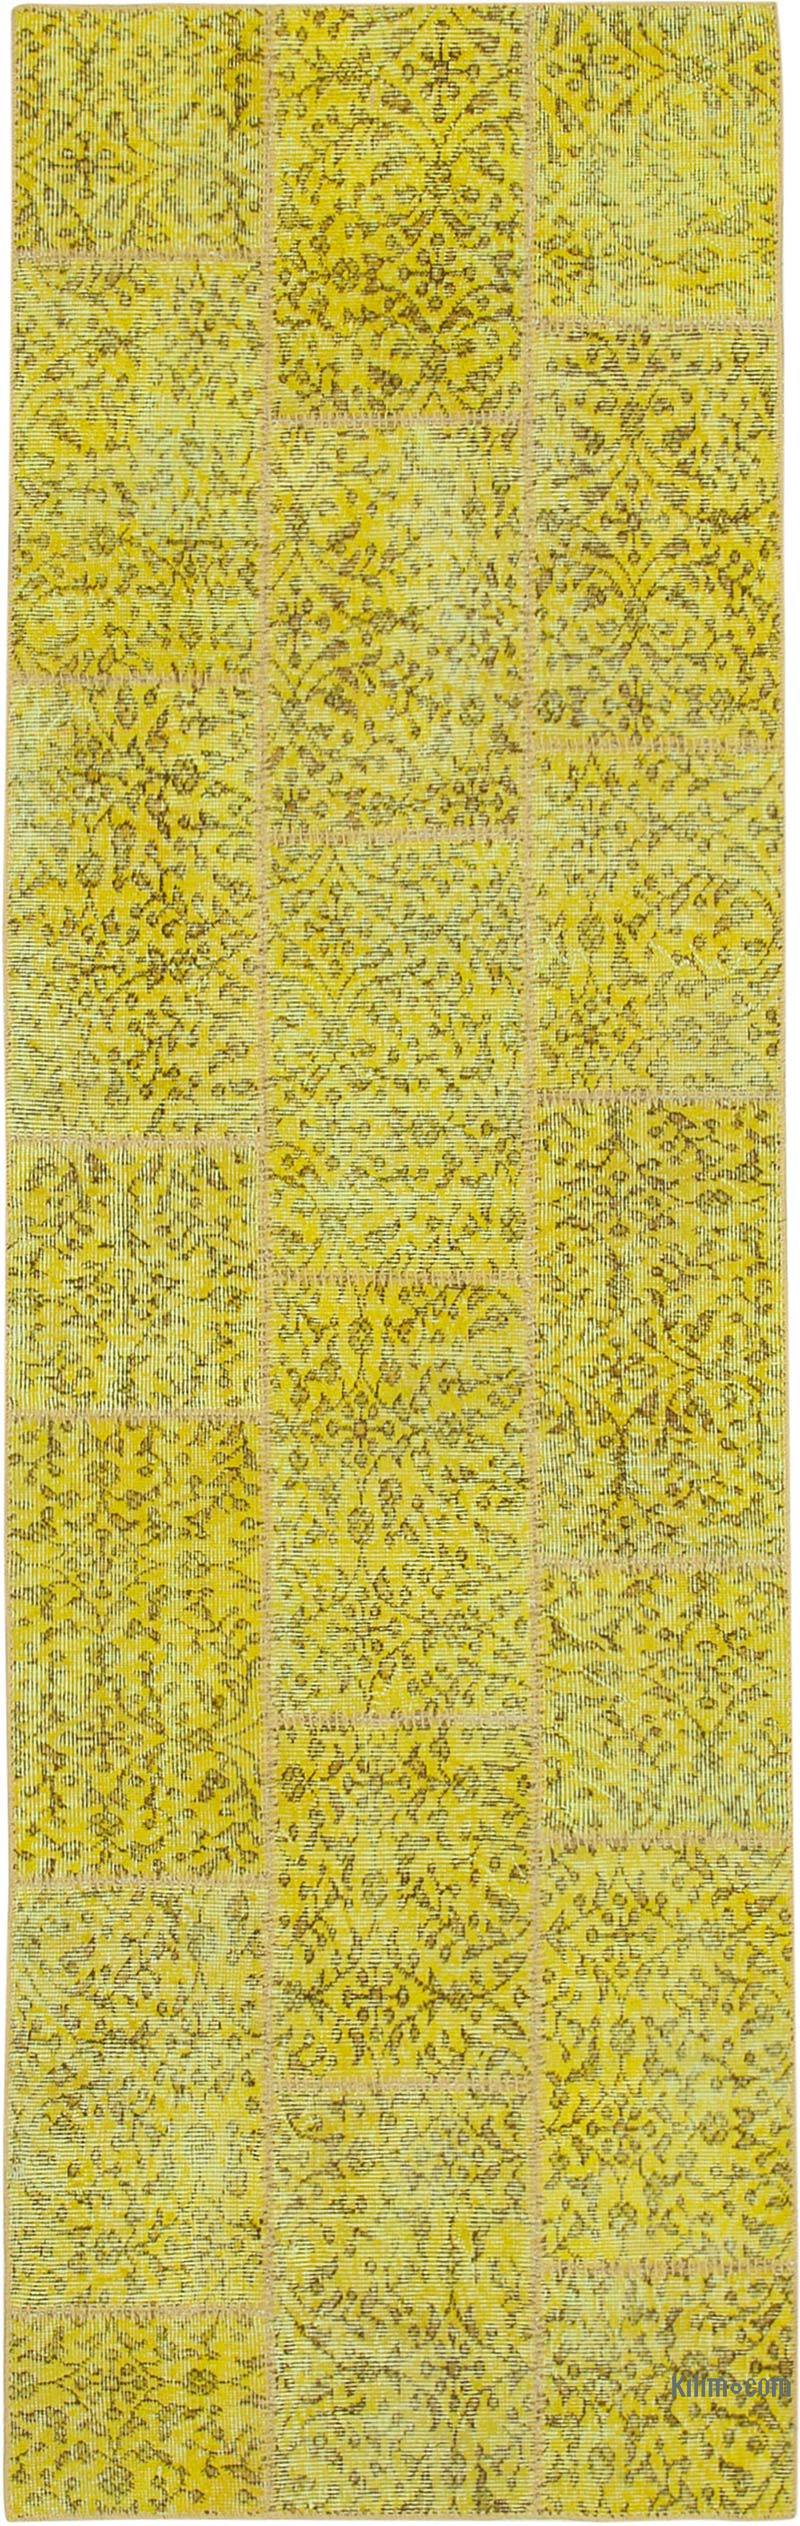 Yellow Patchwork Hand-Knotted Turkish Runner - 2' 10" x 9'  (34" x 108") - K0053862